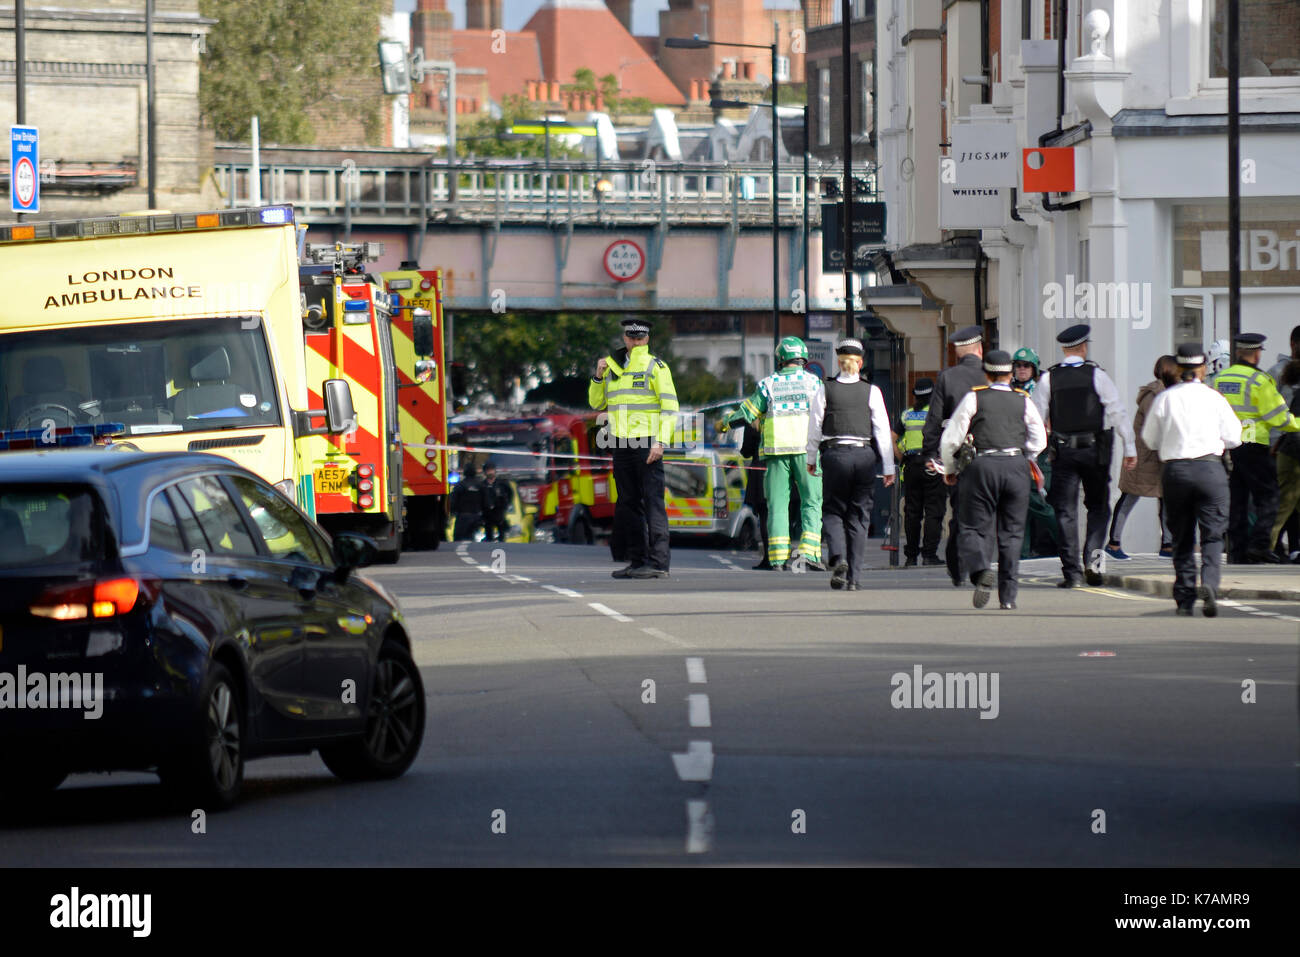 A terrorist bomb explosion has occurred at Parsons Green Underground Station London. Emergency services pictured clearing the scene and assisting injured Stock Photo